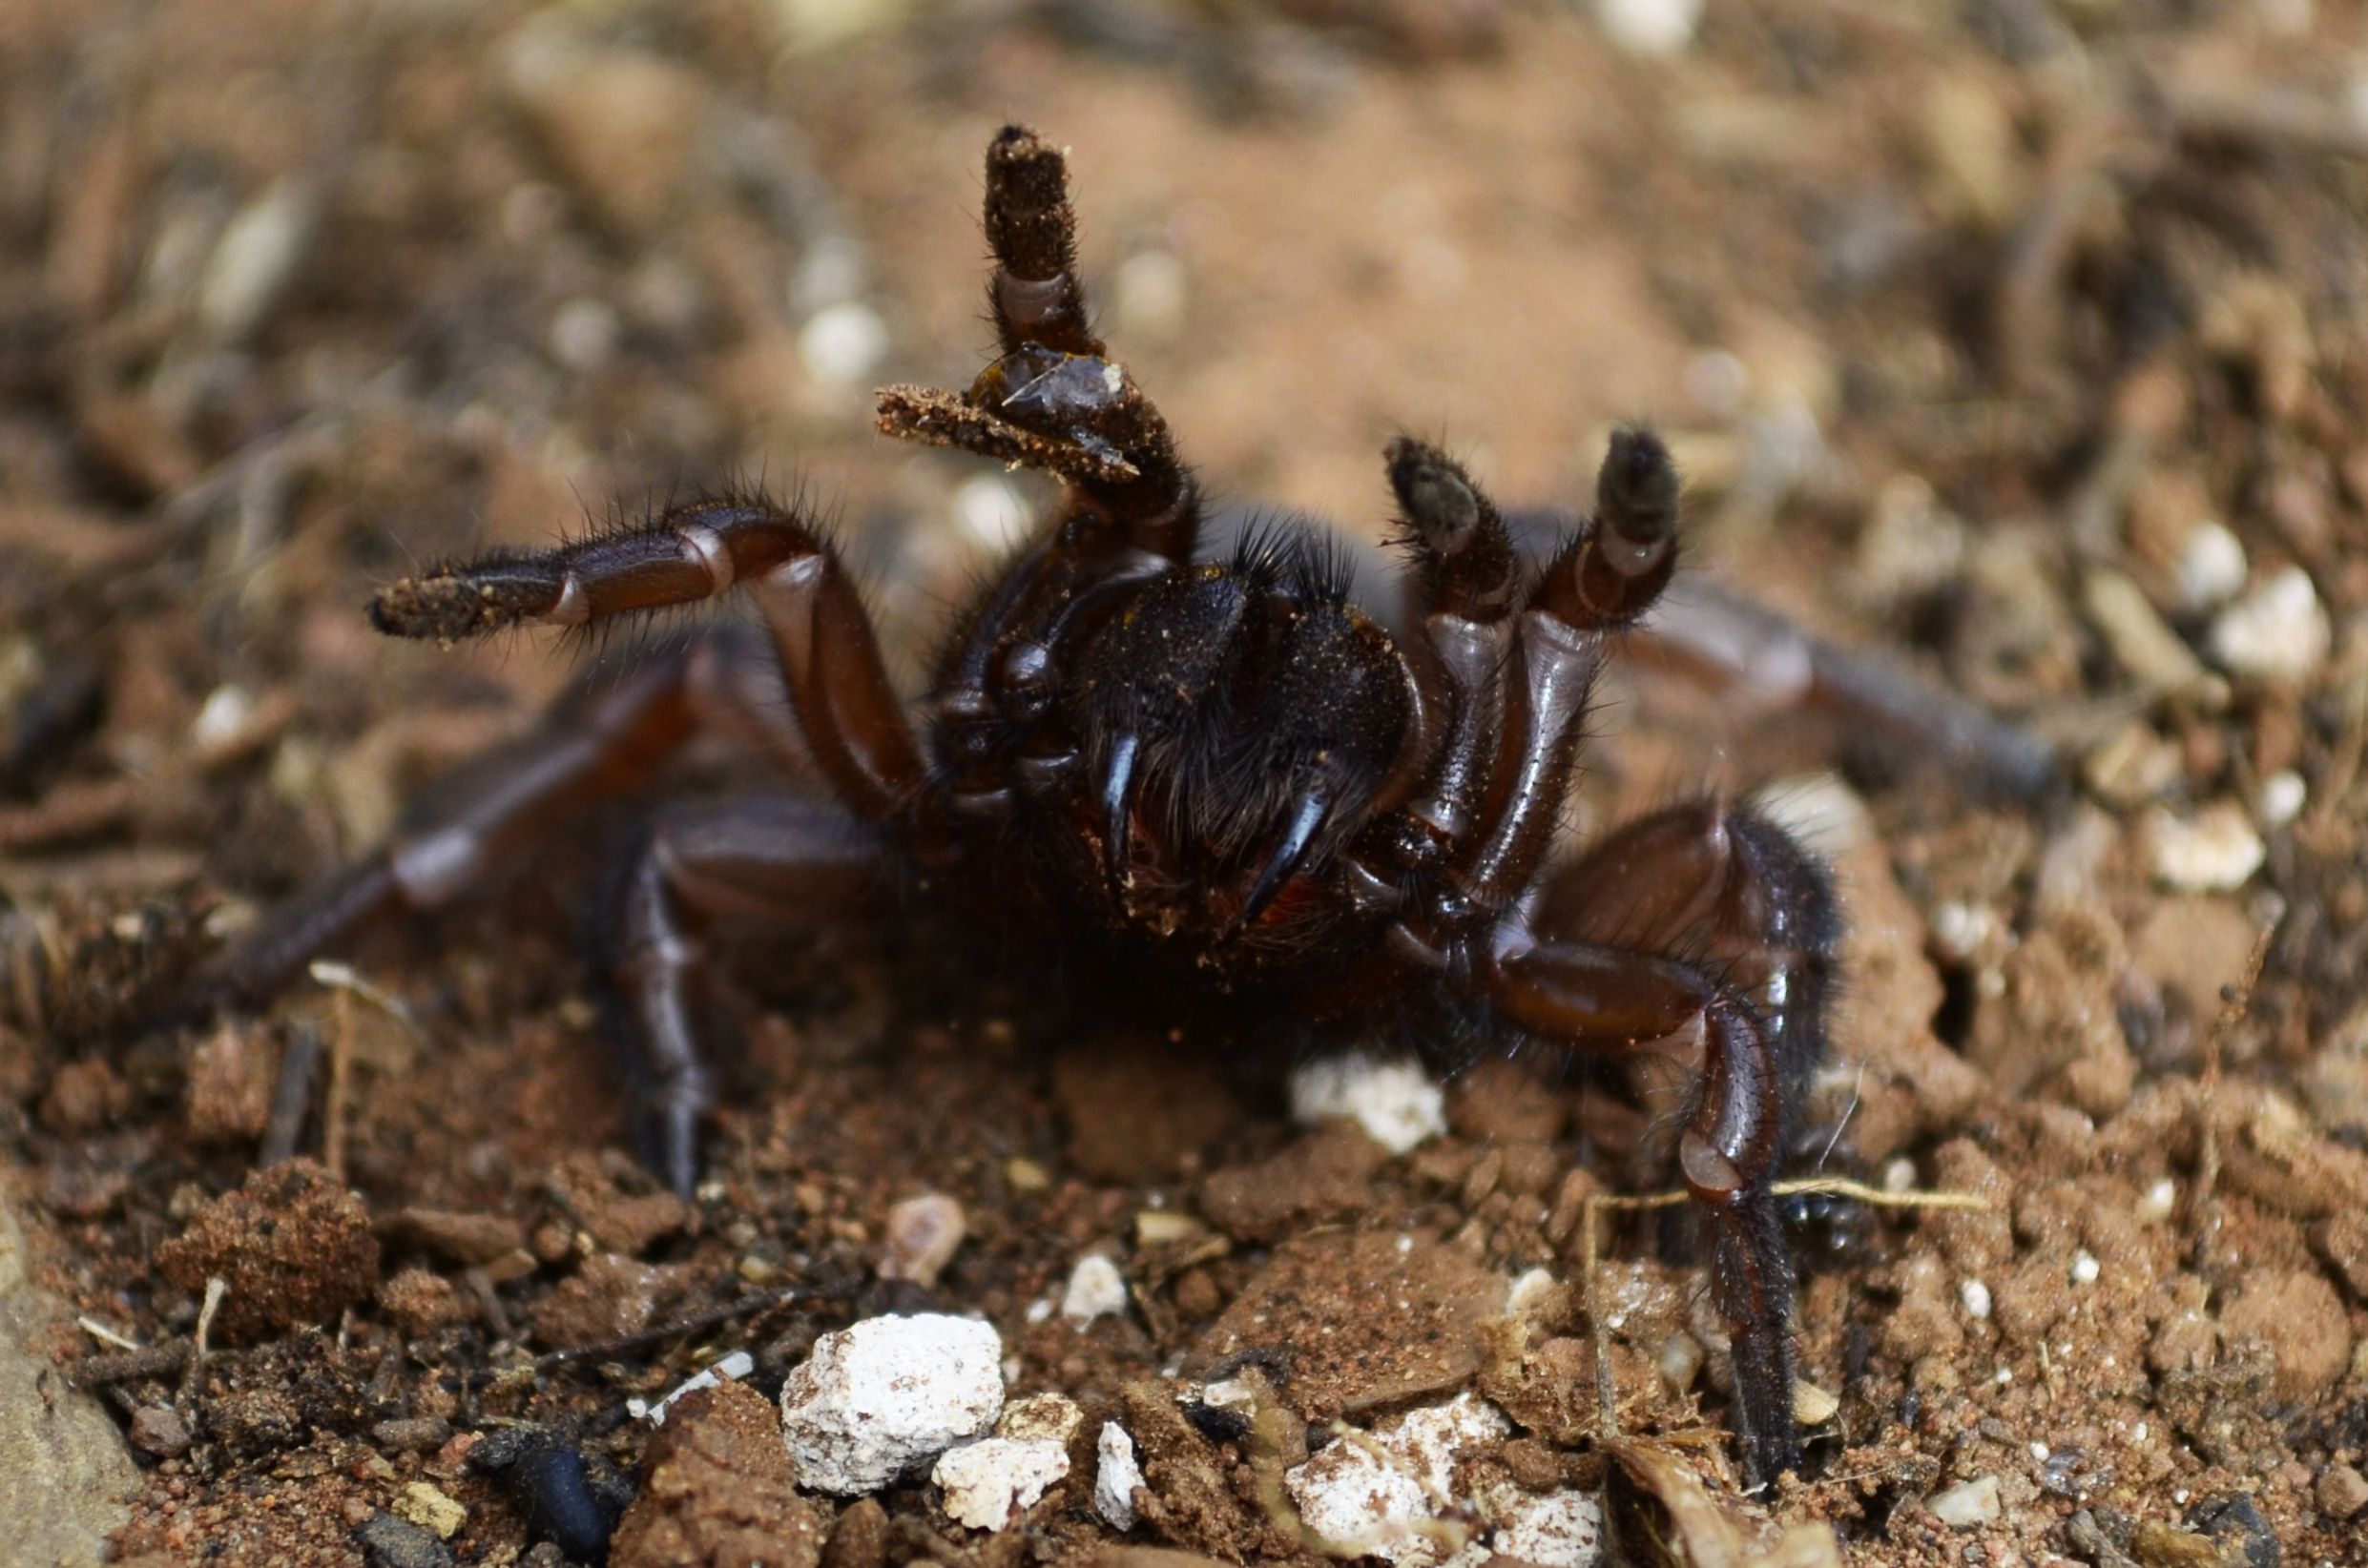 The World's Oldest Spider Dies at Age 43 After Wasp Attack